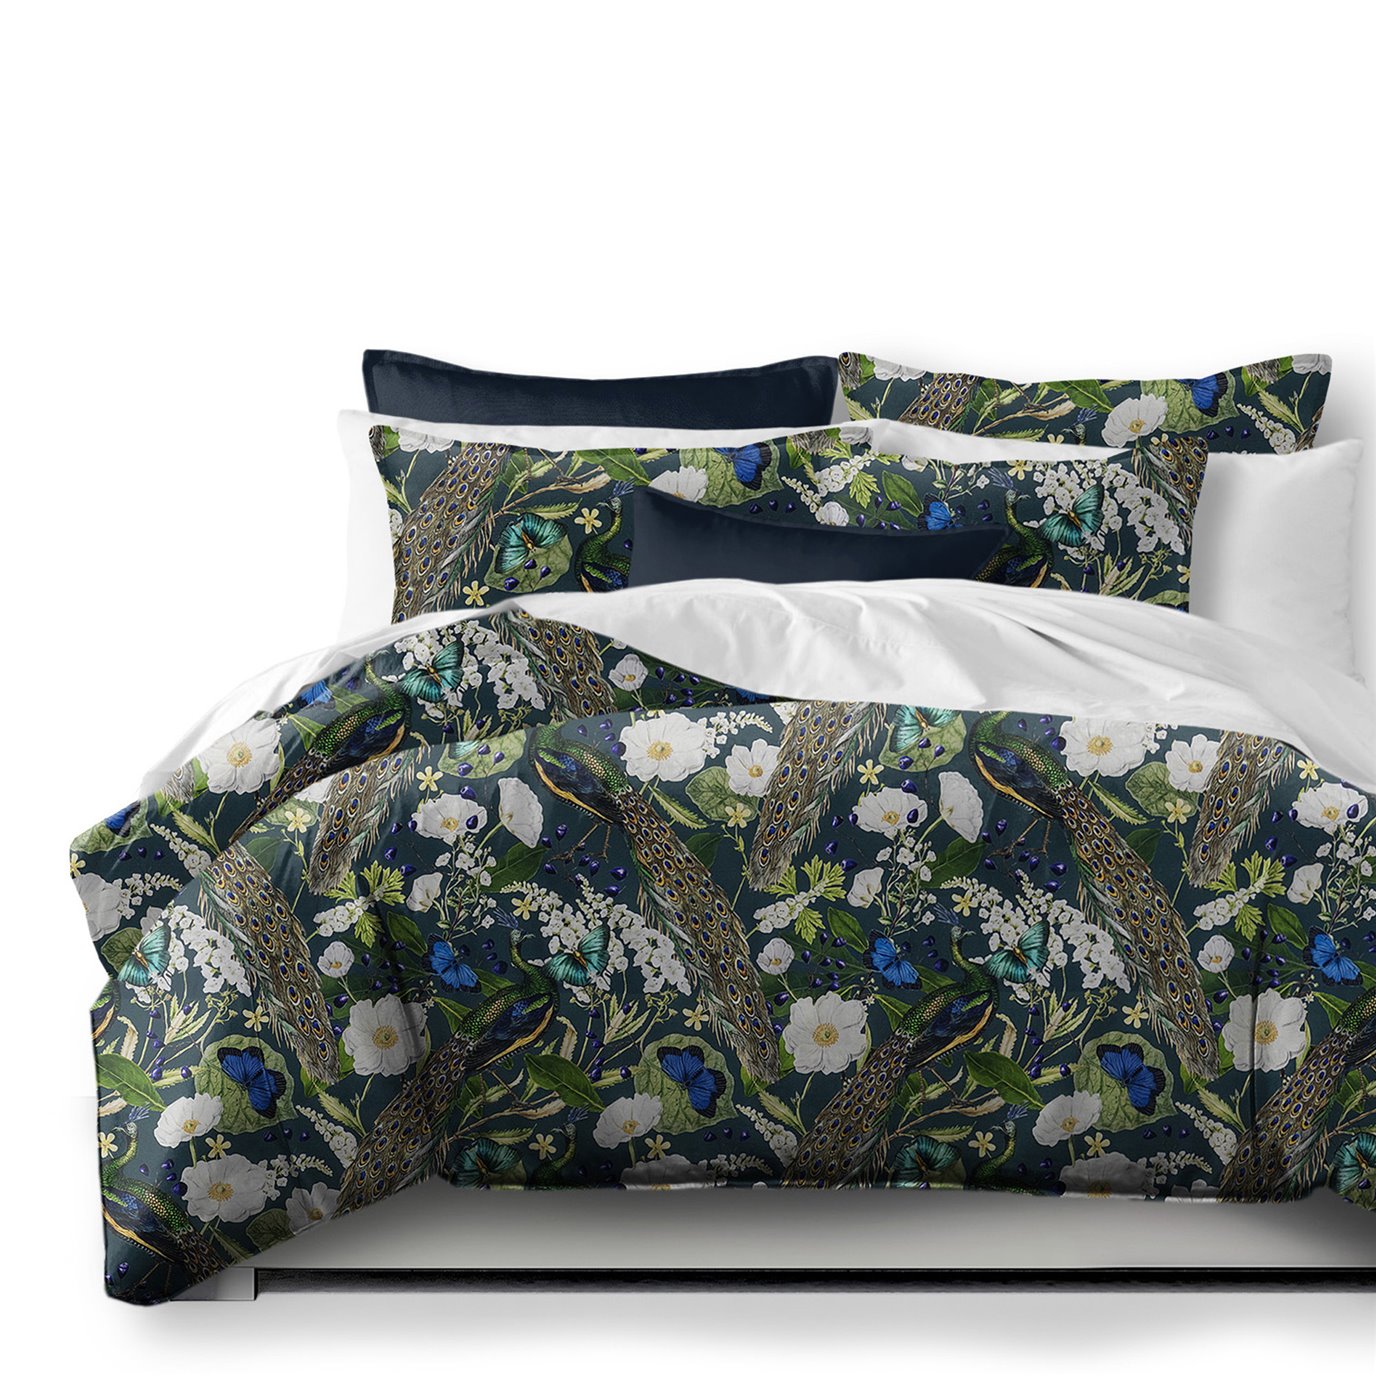 Peacock Print Teal/Navy Coverlet and Pillow Sham(s) Set - Size Queen